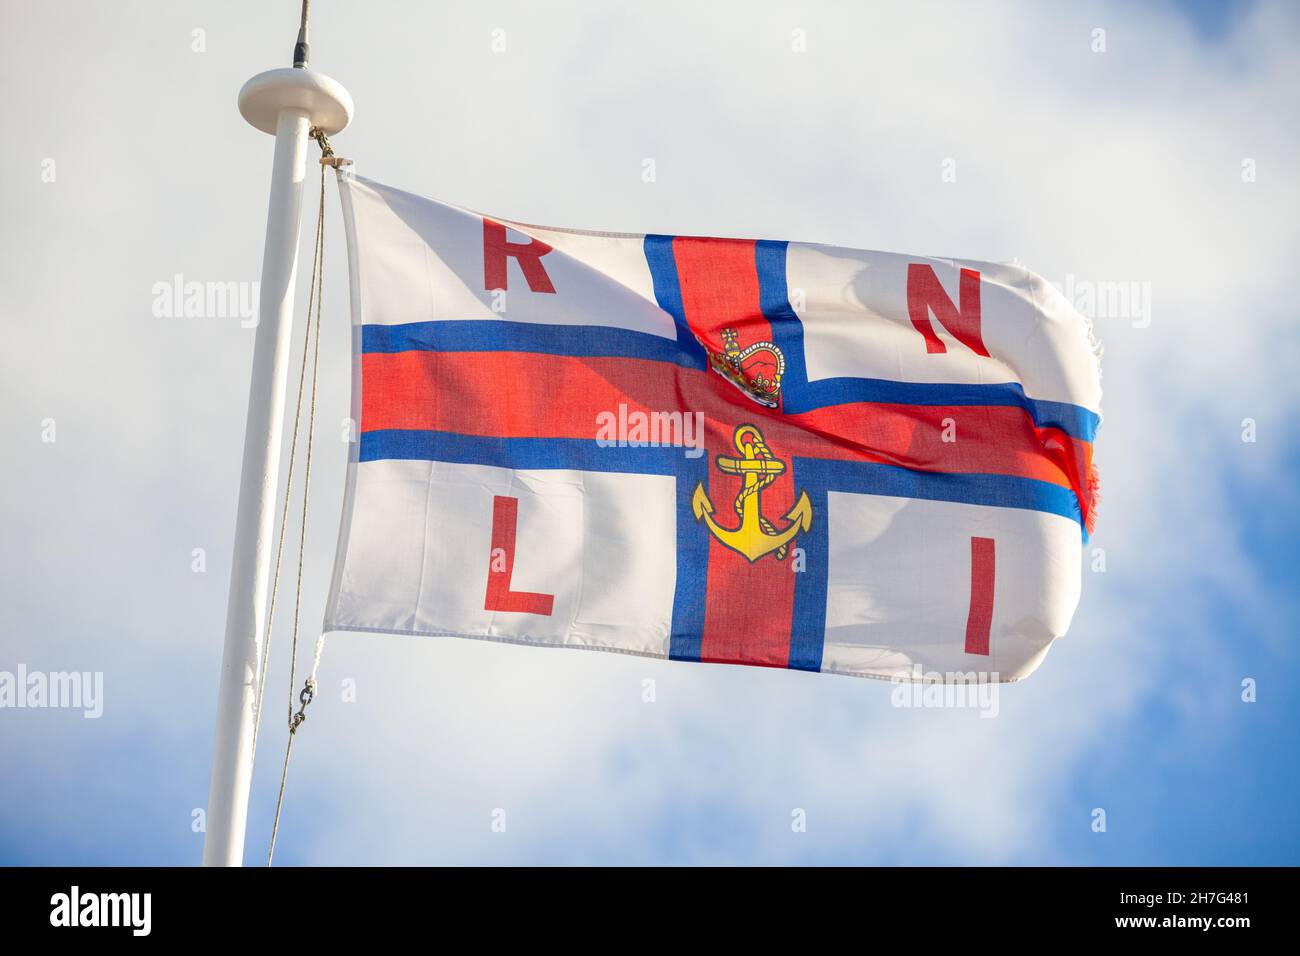 A flag of the Royal National Lifeboat Institution RNLI flying in the wind Stock Photo